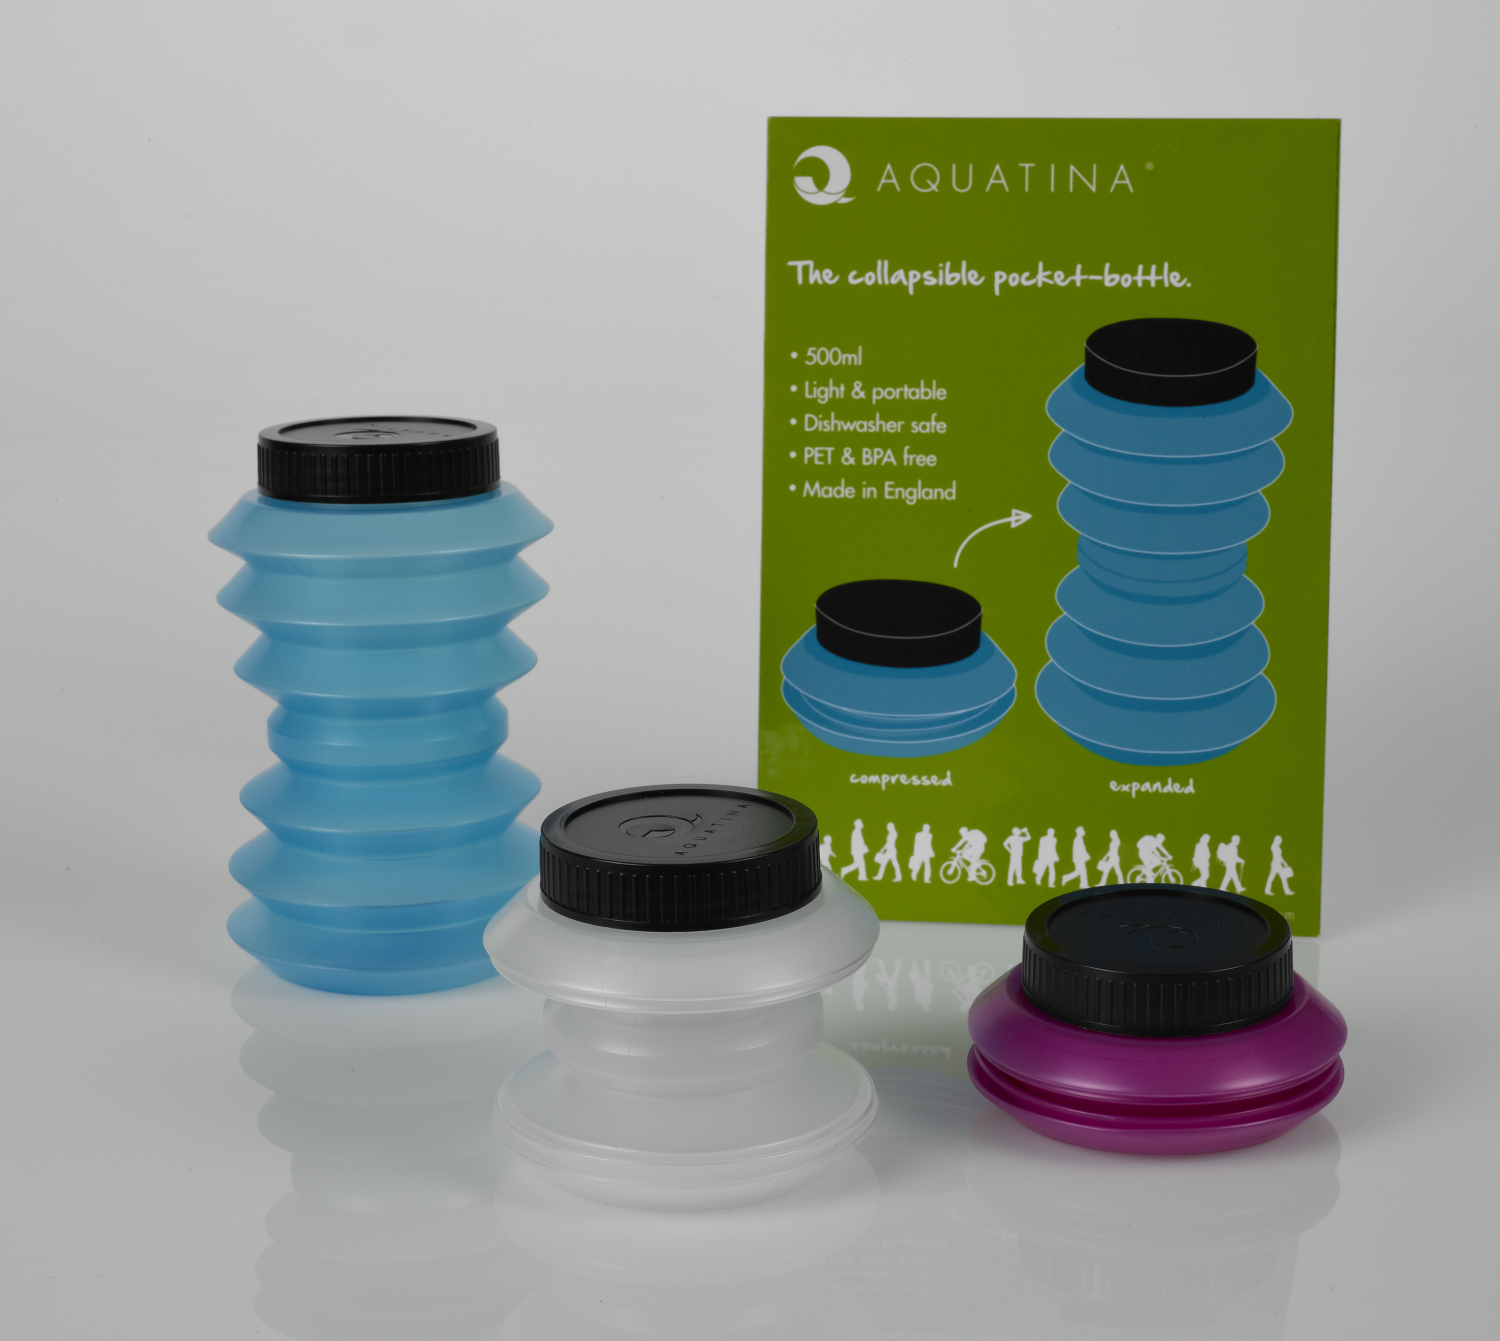 Review of Aquatina - The Collapsible Pocket-Bottle. image